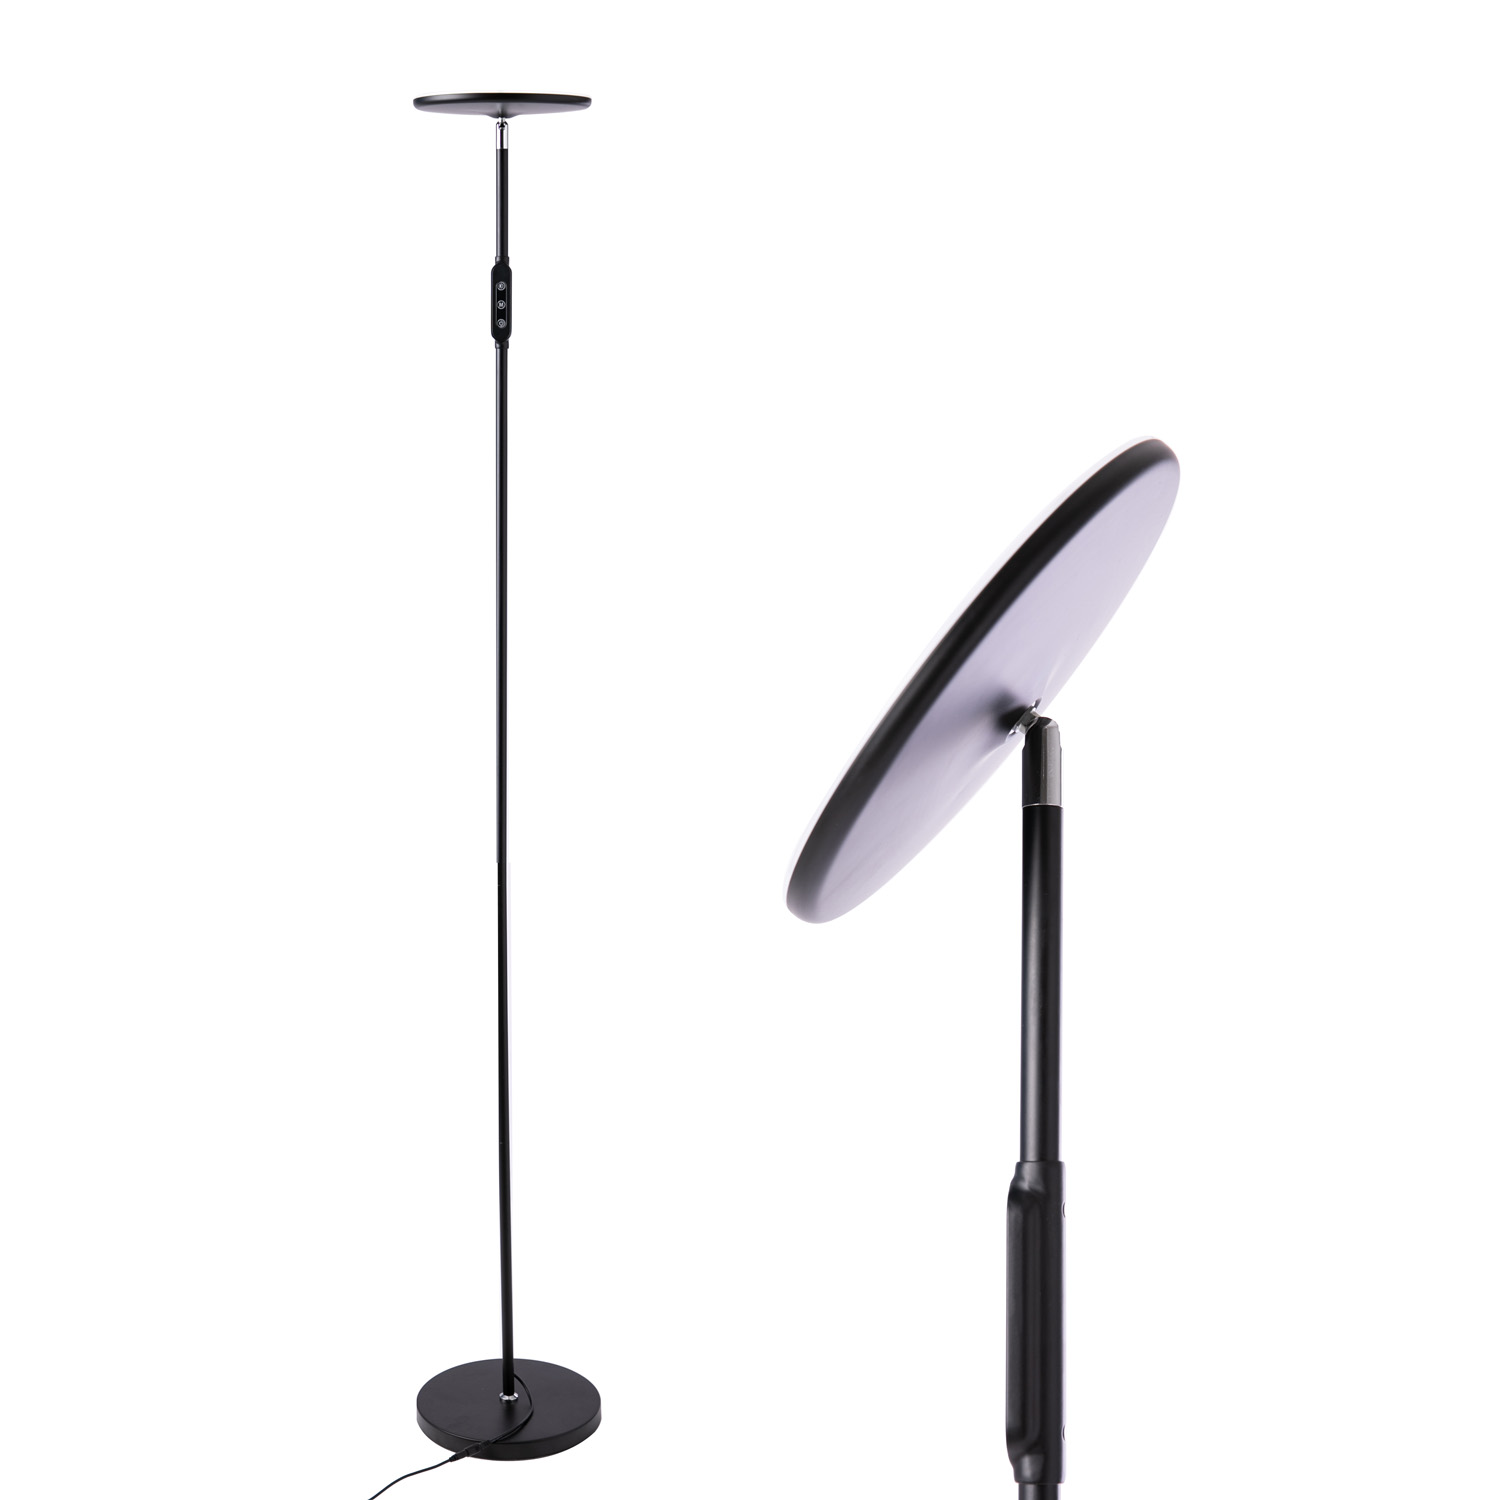 30W Sky LED Modern Torchiere Super Bright Floor Lamp Featured Image